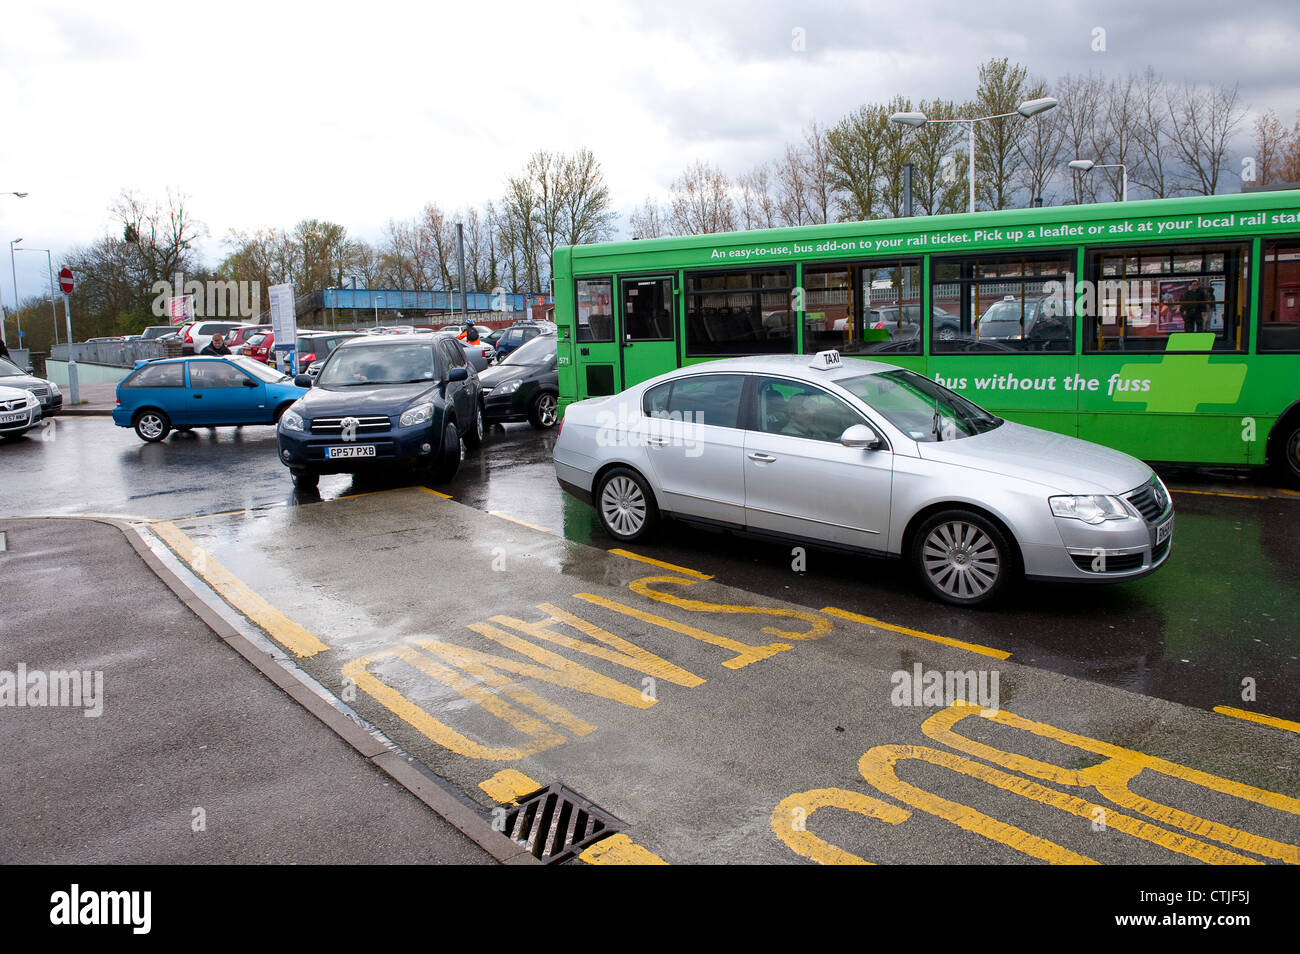 Taxi cabs and cars drive around a plusbus waiting at a bus stop outside Hatfield Railway Station, England. Stock Photo